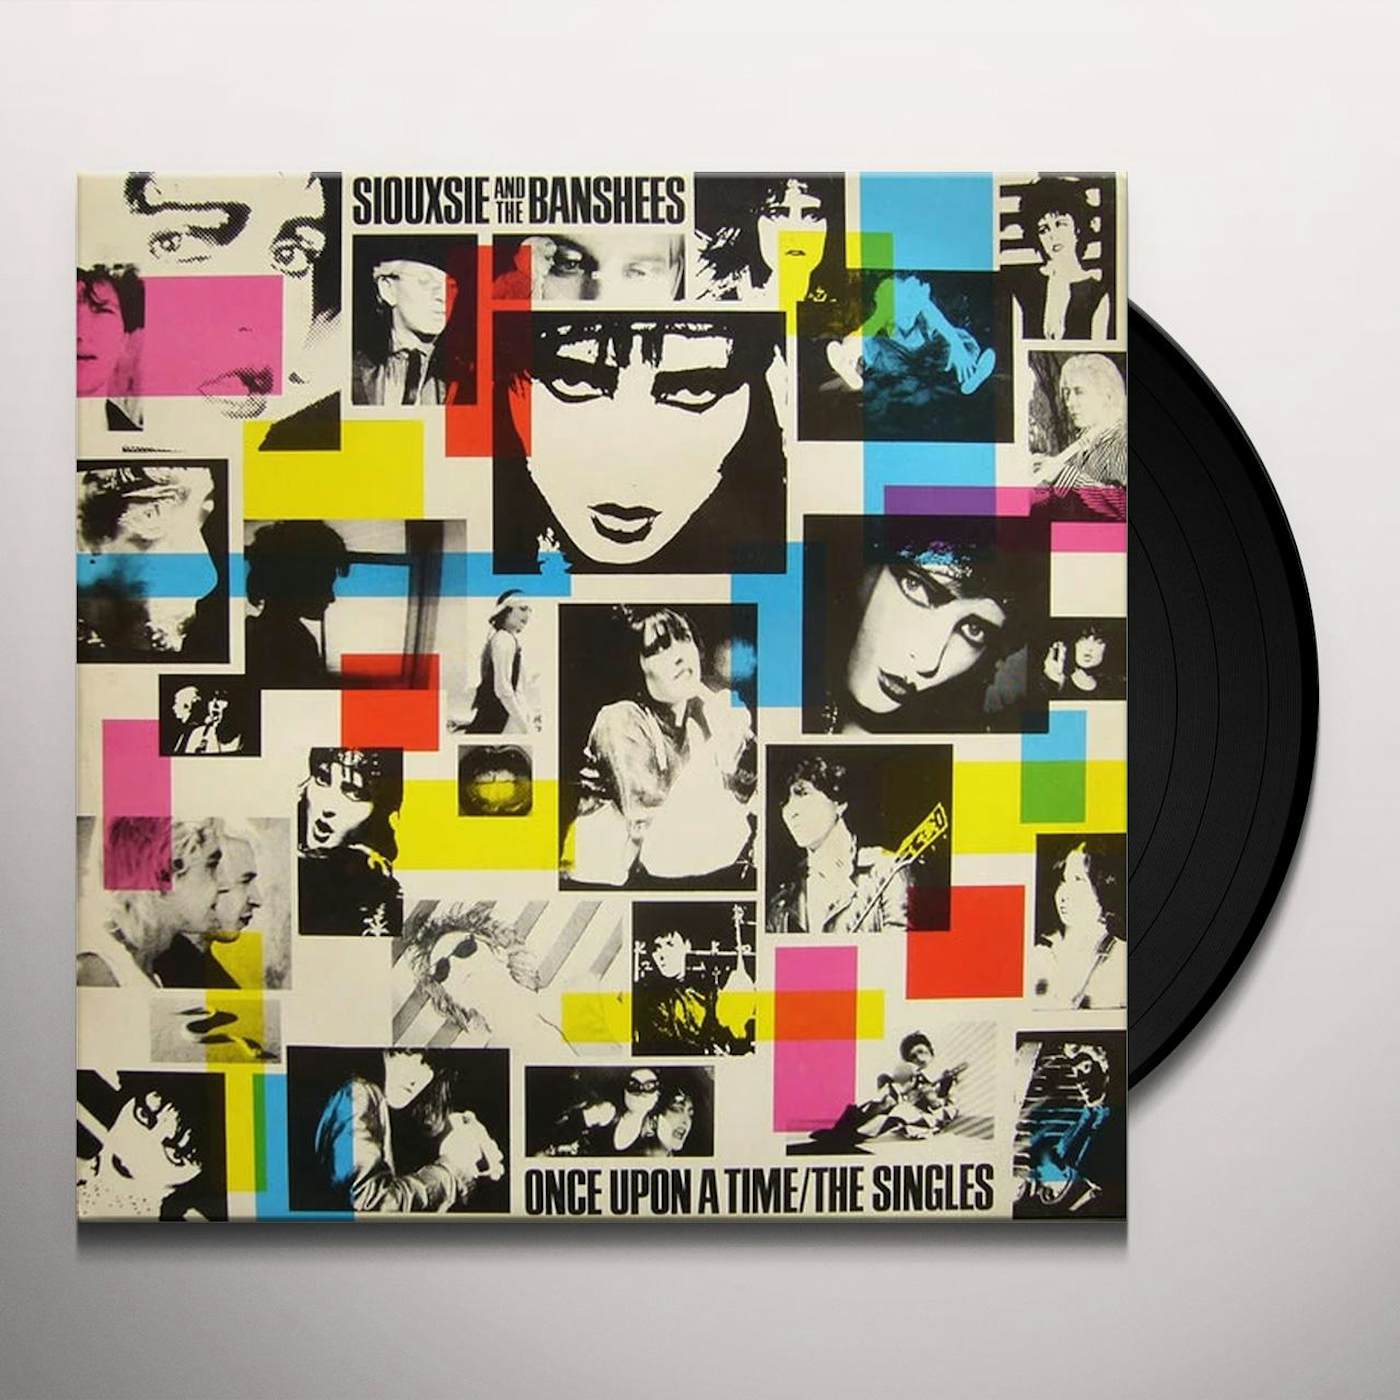 Siouxsie and the Banshees Once Upon A Time/The Singles Vinyl Record